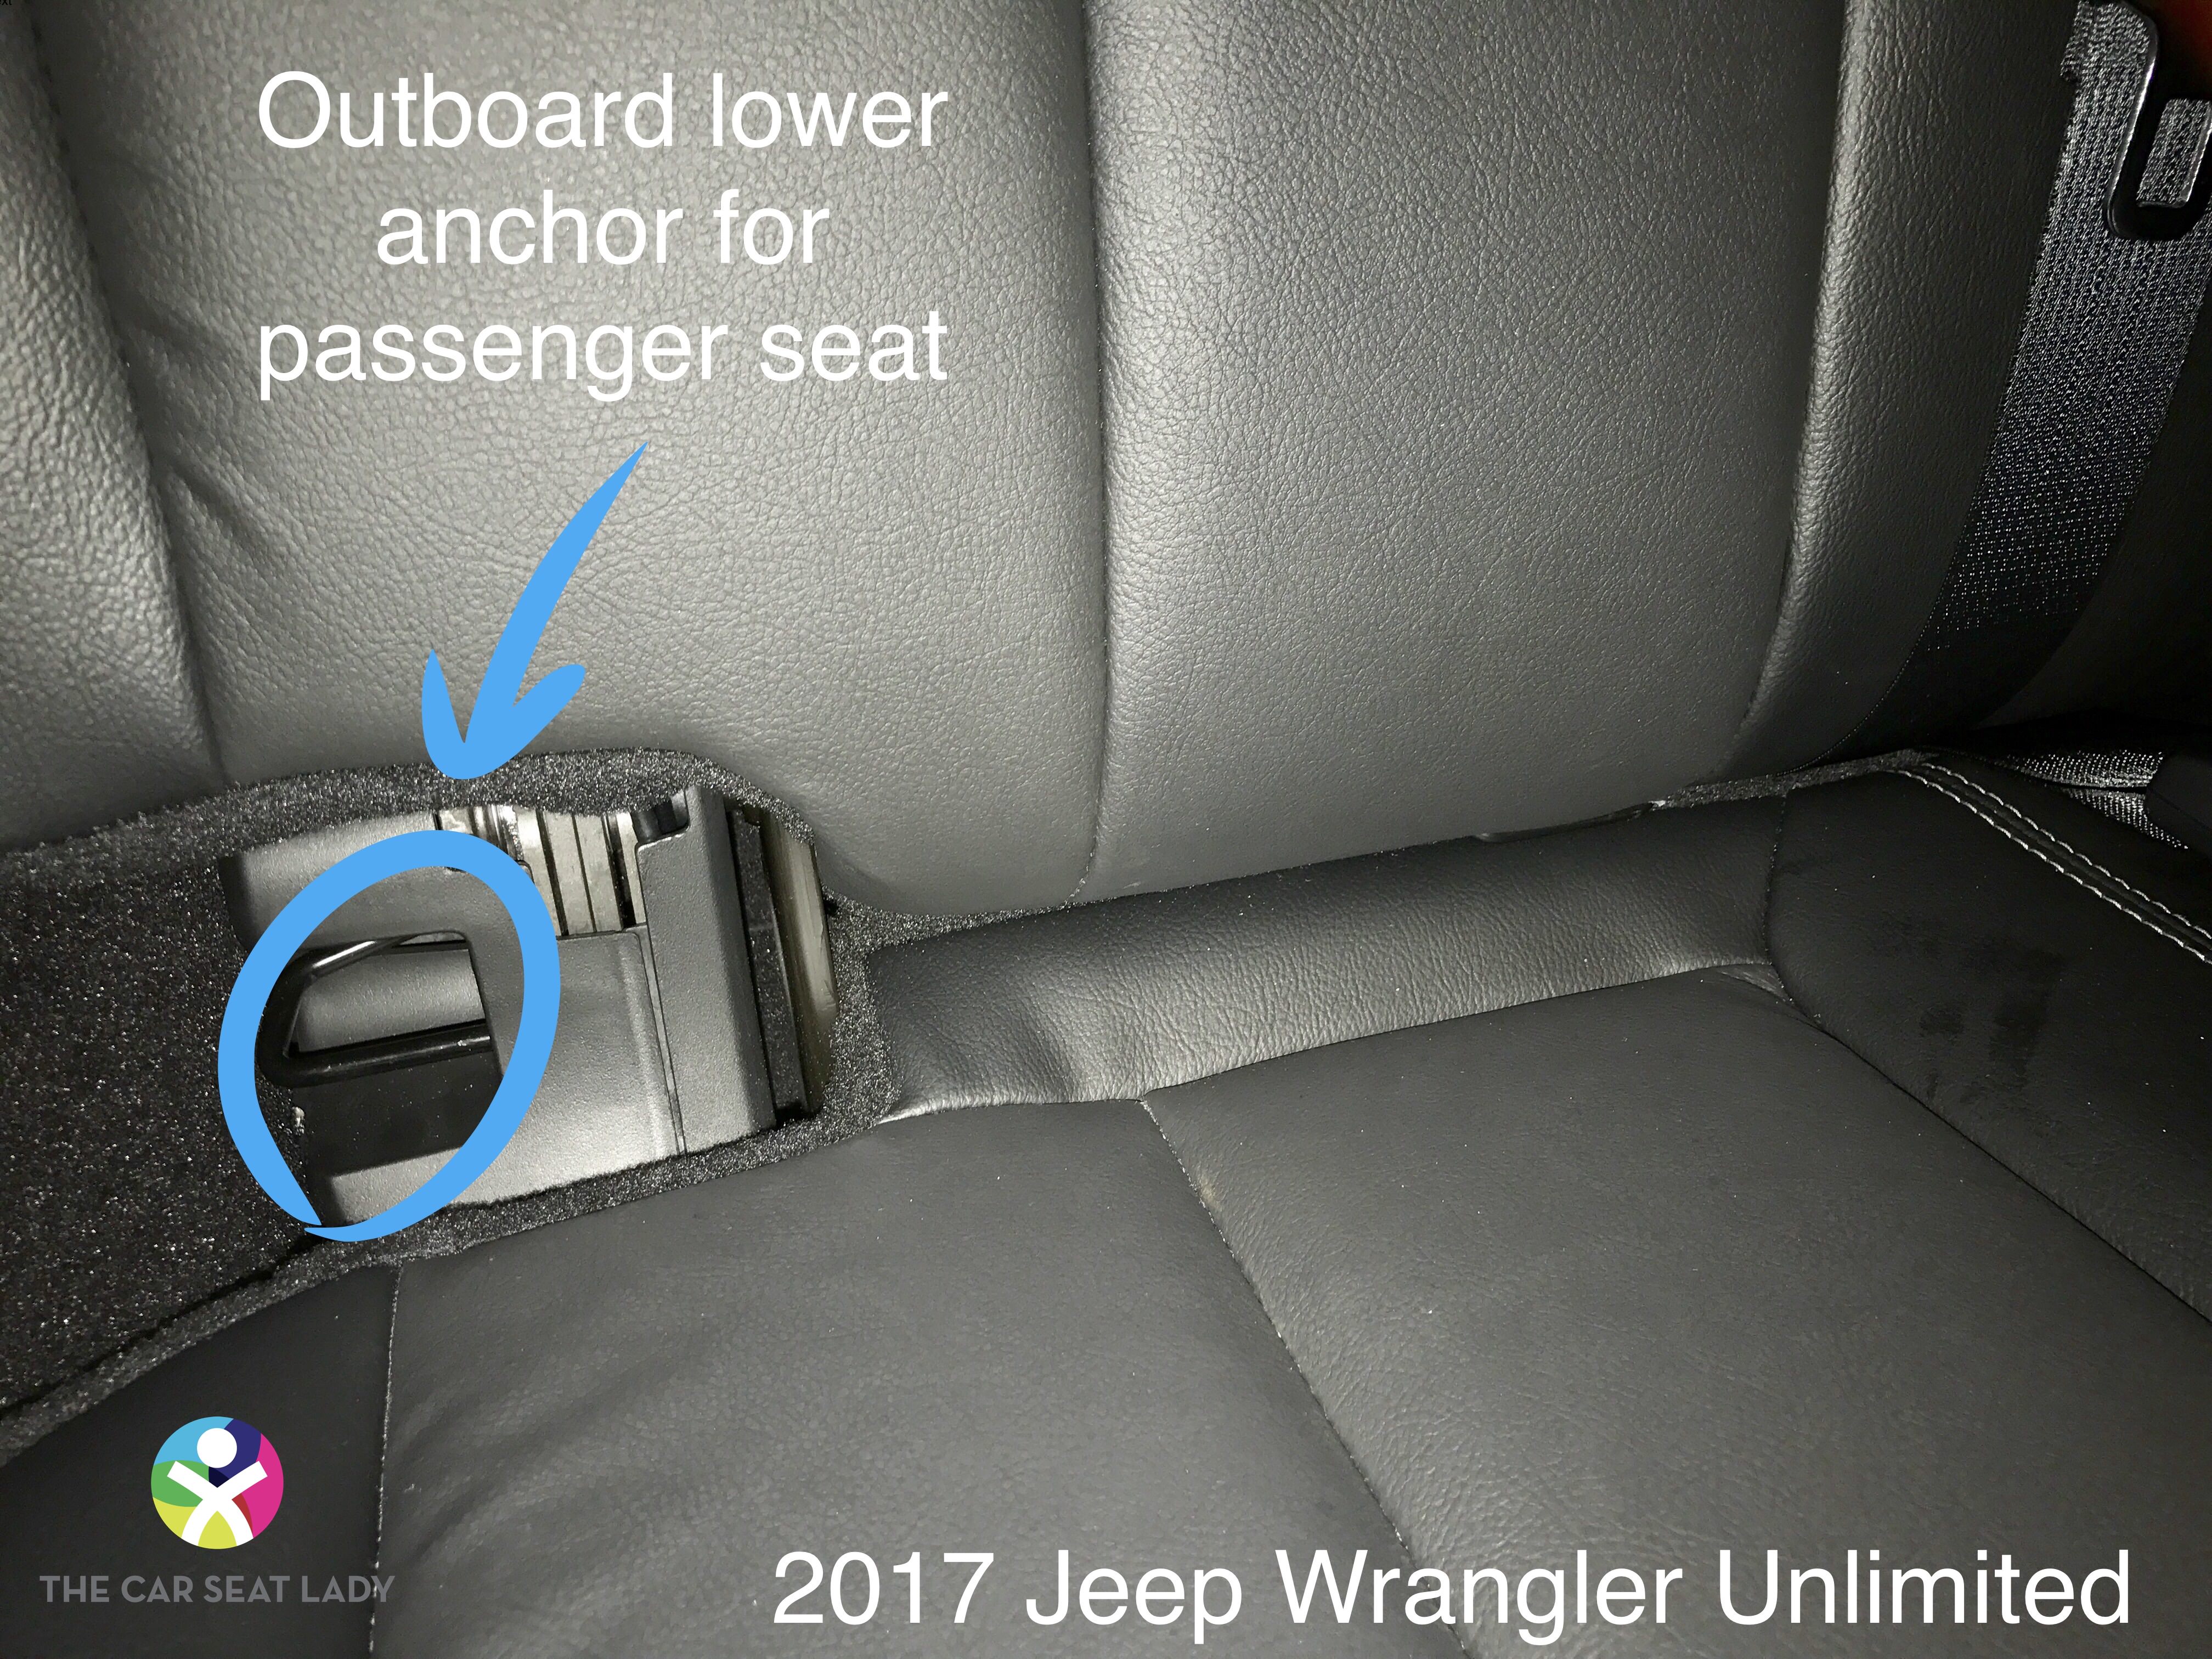 The Car Seat LadyJeep Wrangler Unlimited - The Car Seat Lady